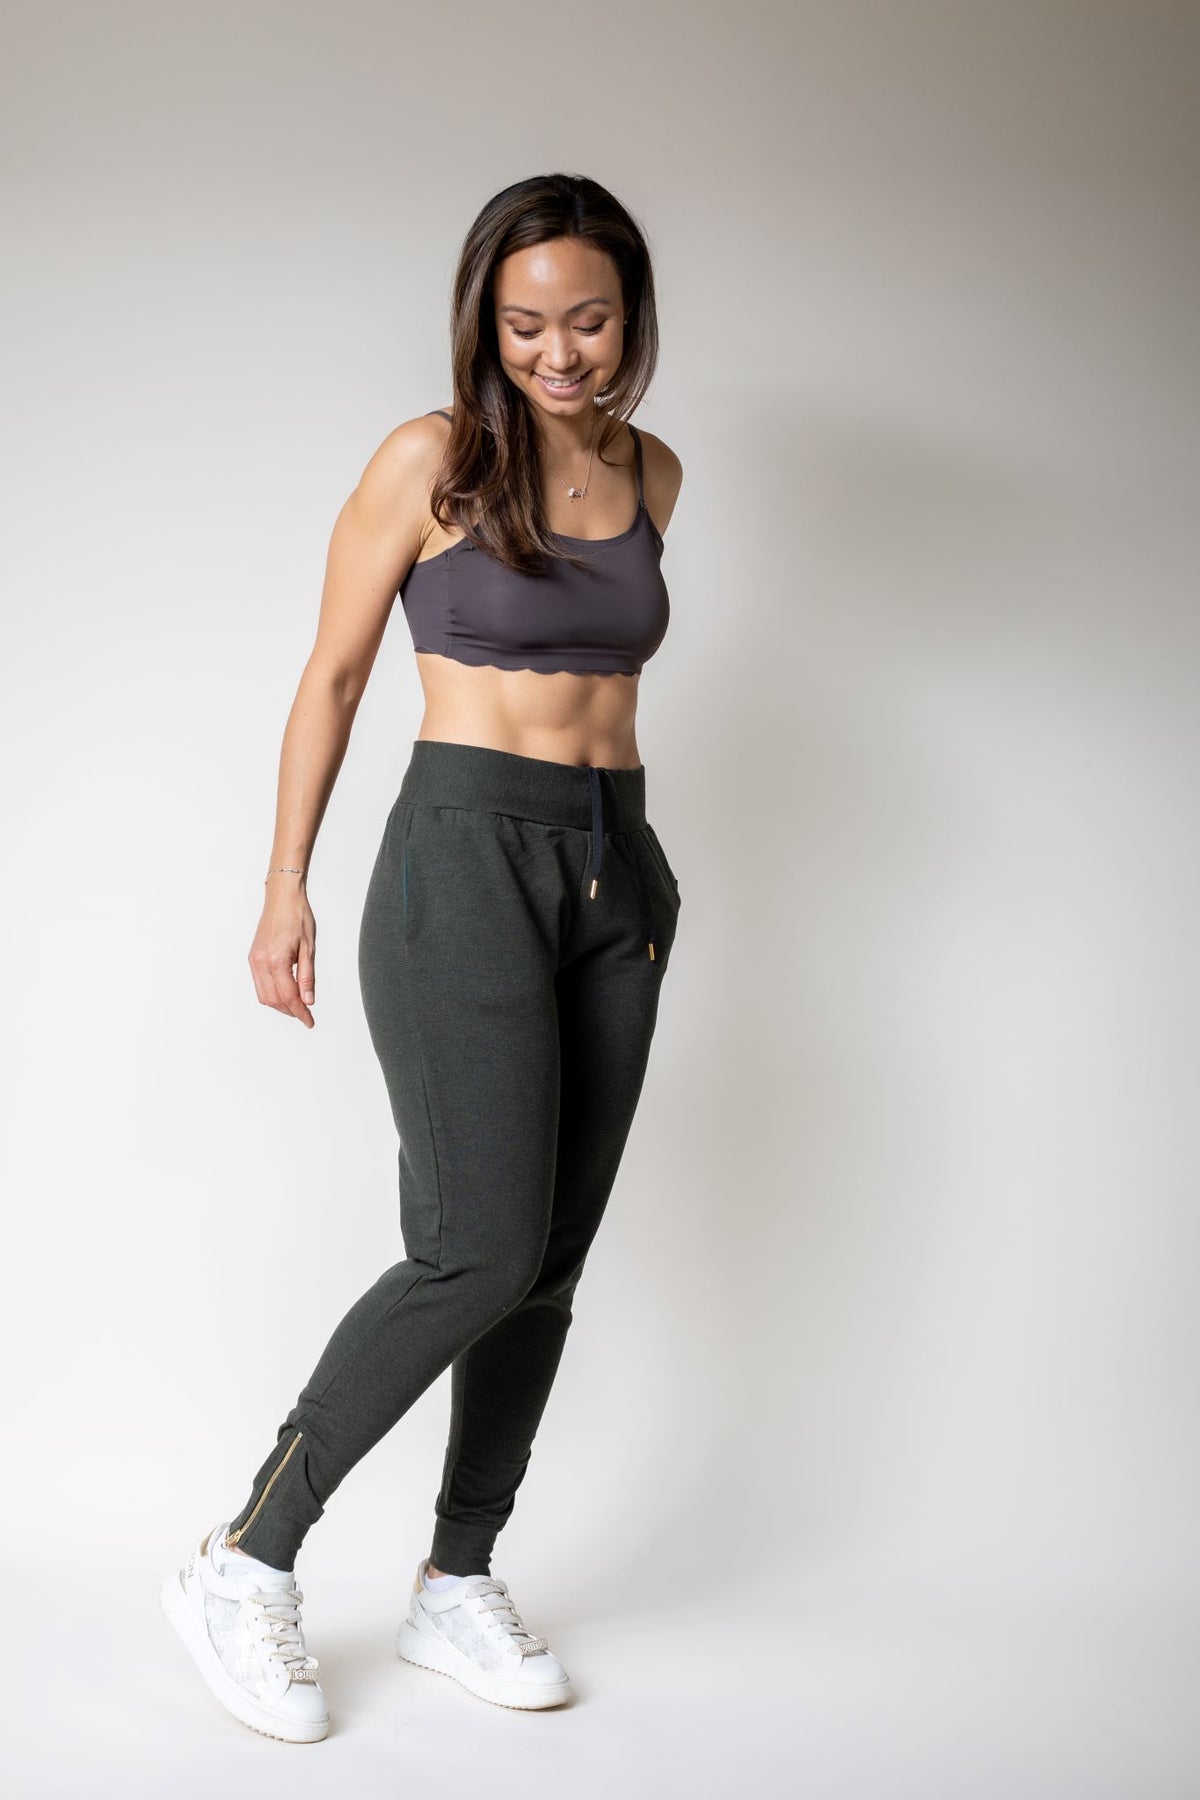 US, She-Wolf Do-Knot-Joggers - Olive, Workout Pants Women